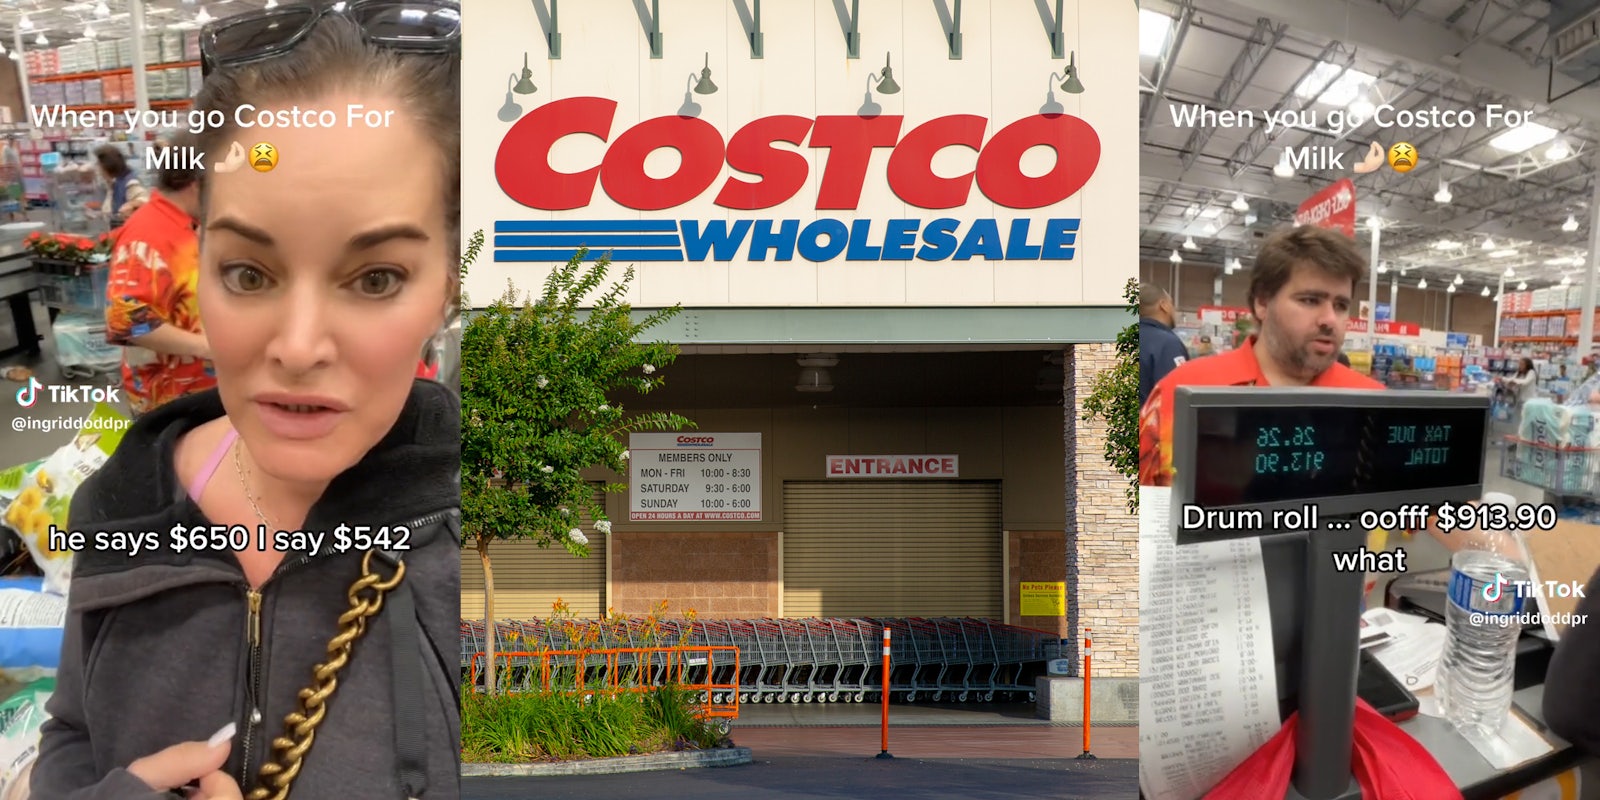 woman spends $913.90 at Costco